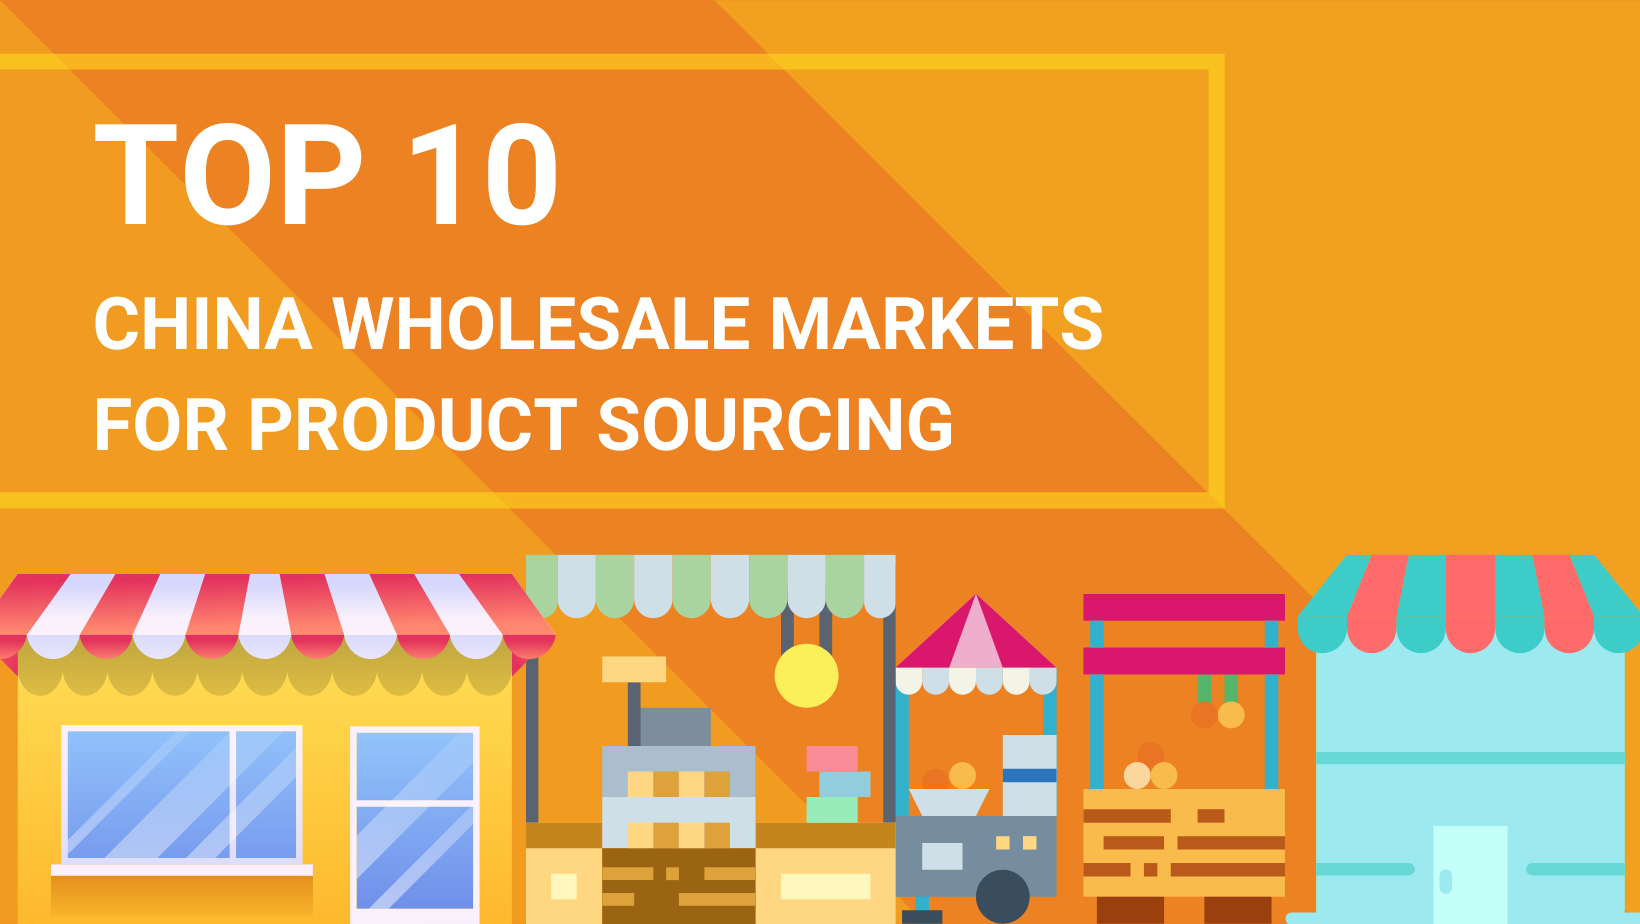 TOP 10 CHINA WHOLESALE MARKETS FOR PRODUCT SOURCING